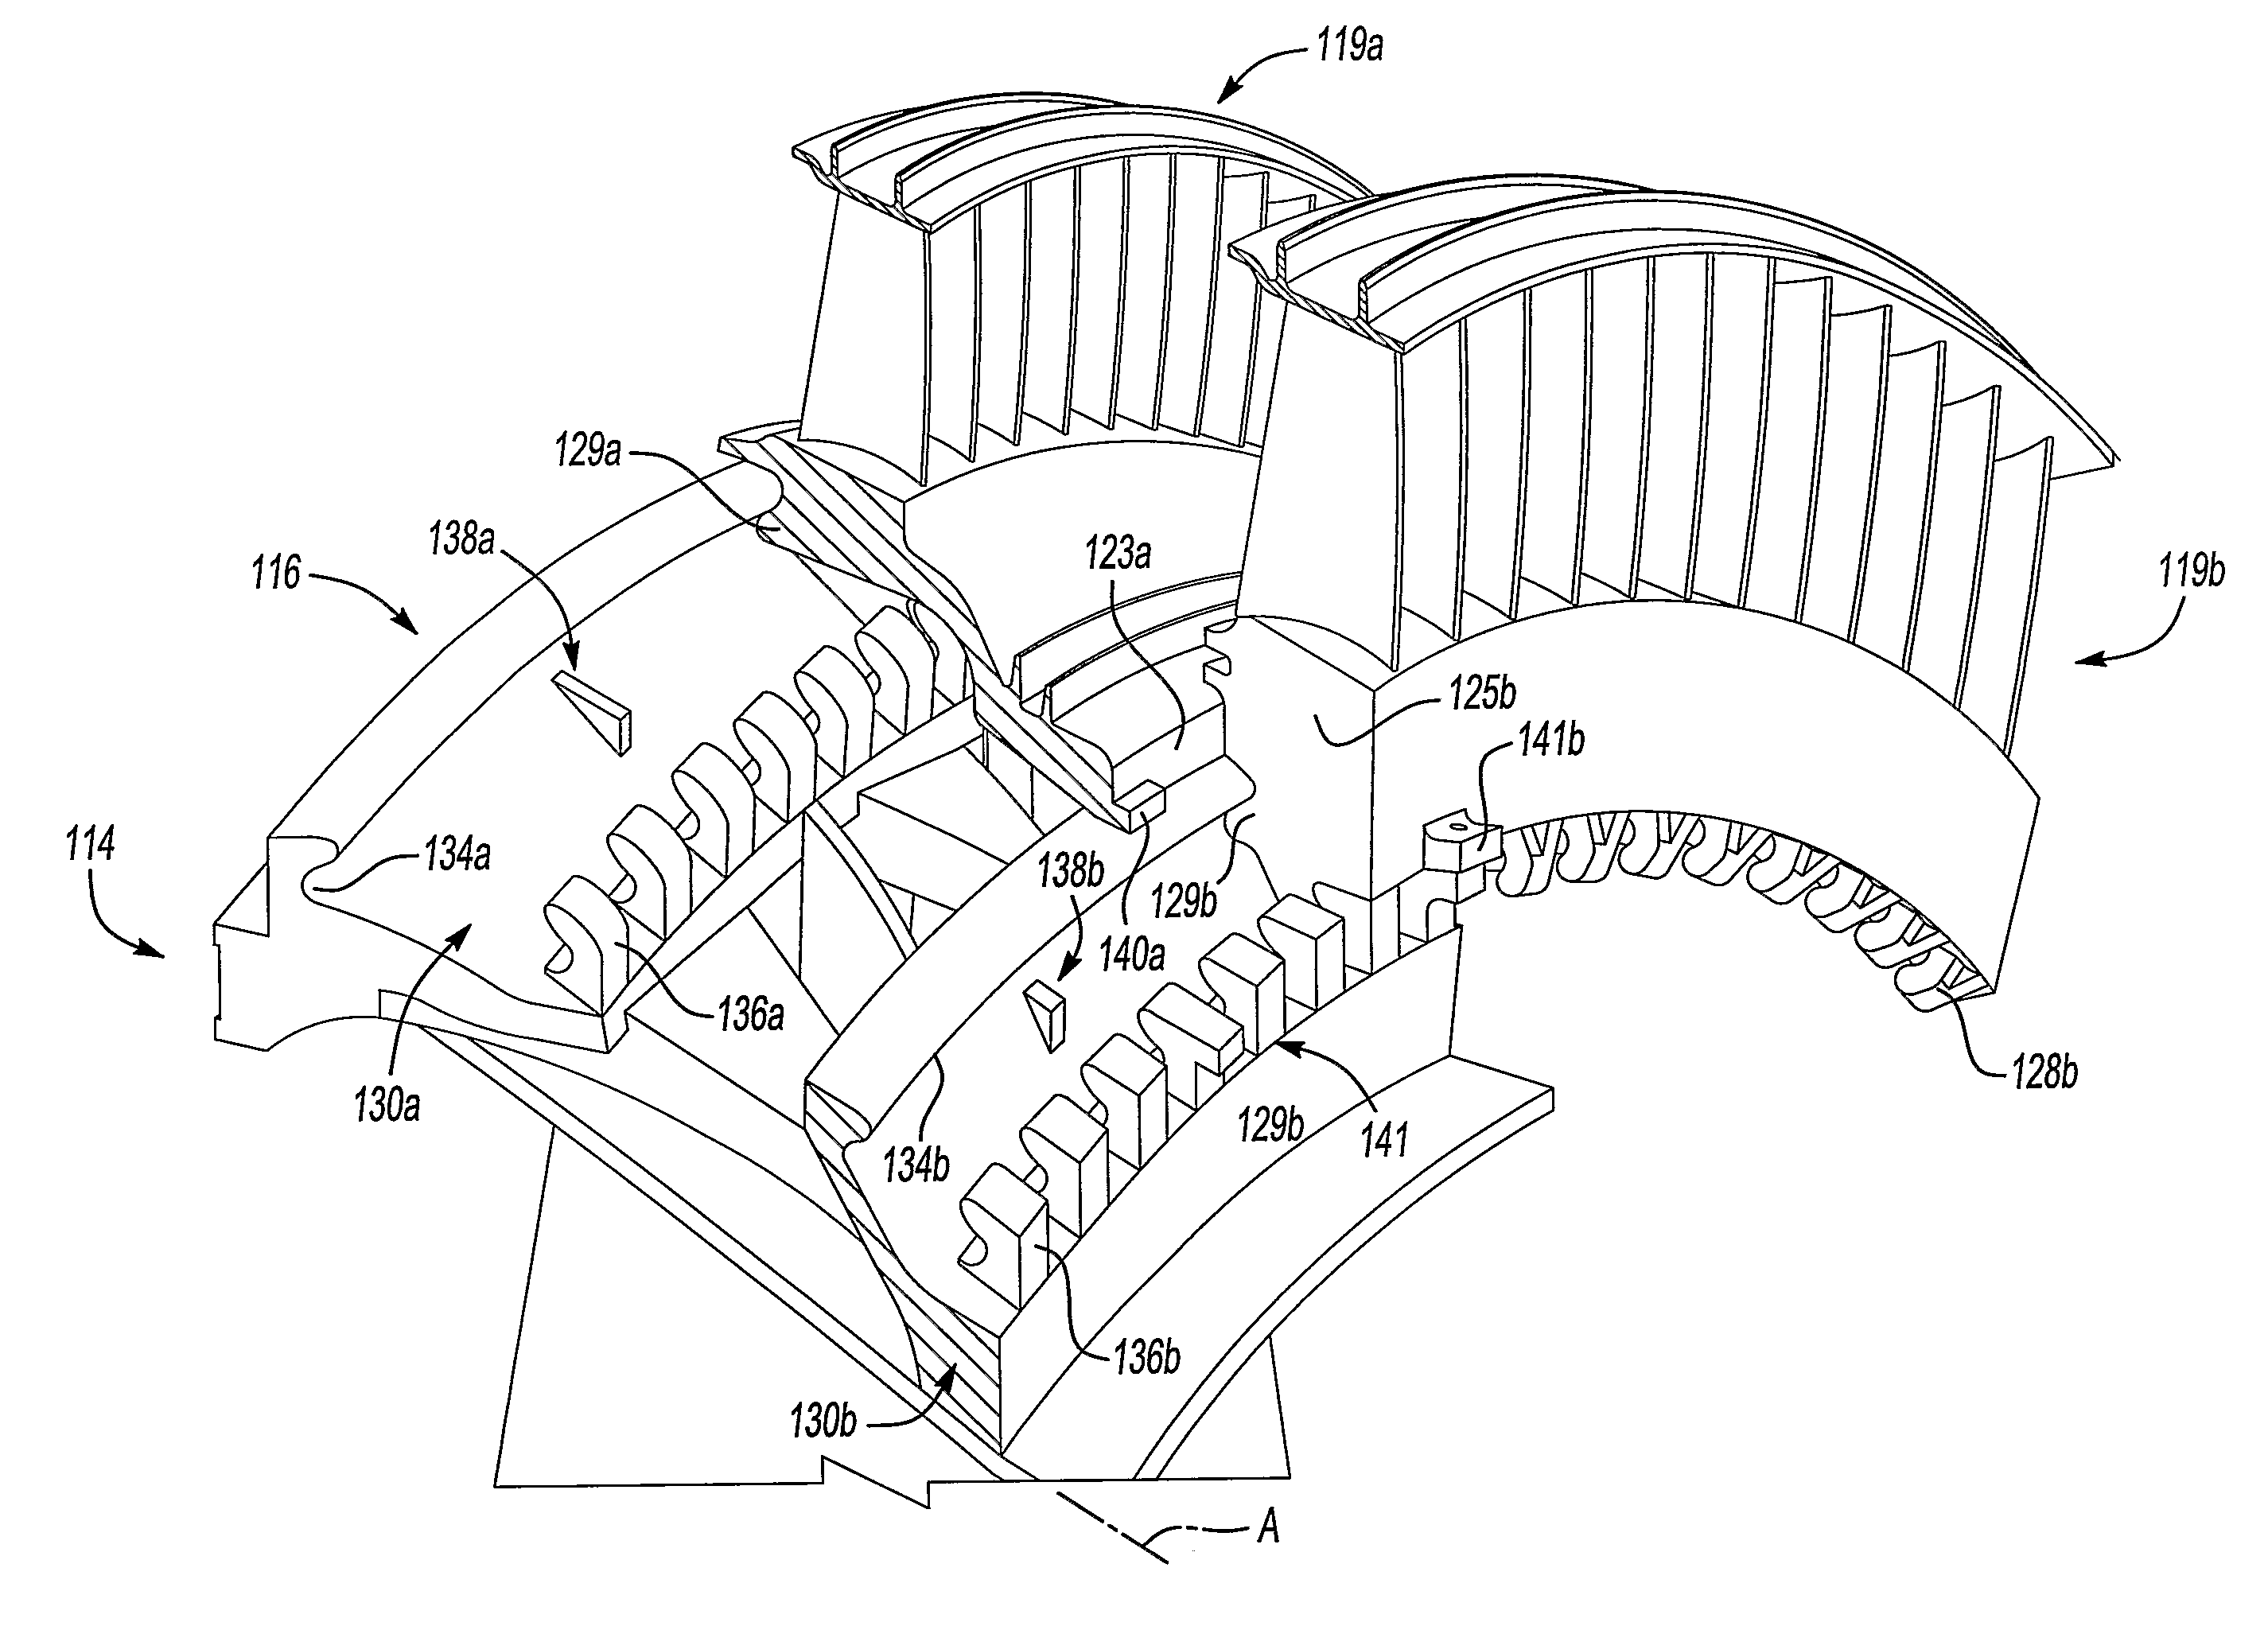 Tip turbine engine comprising turbine clusters and radial attachment lock arrangement therefor